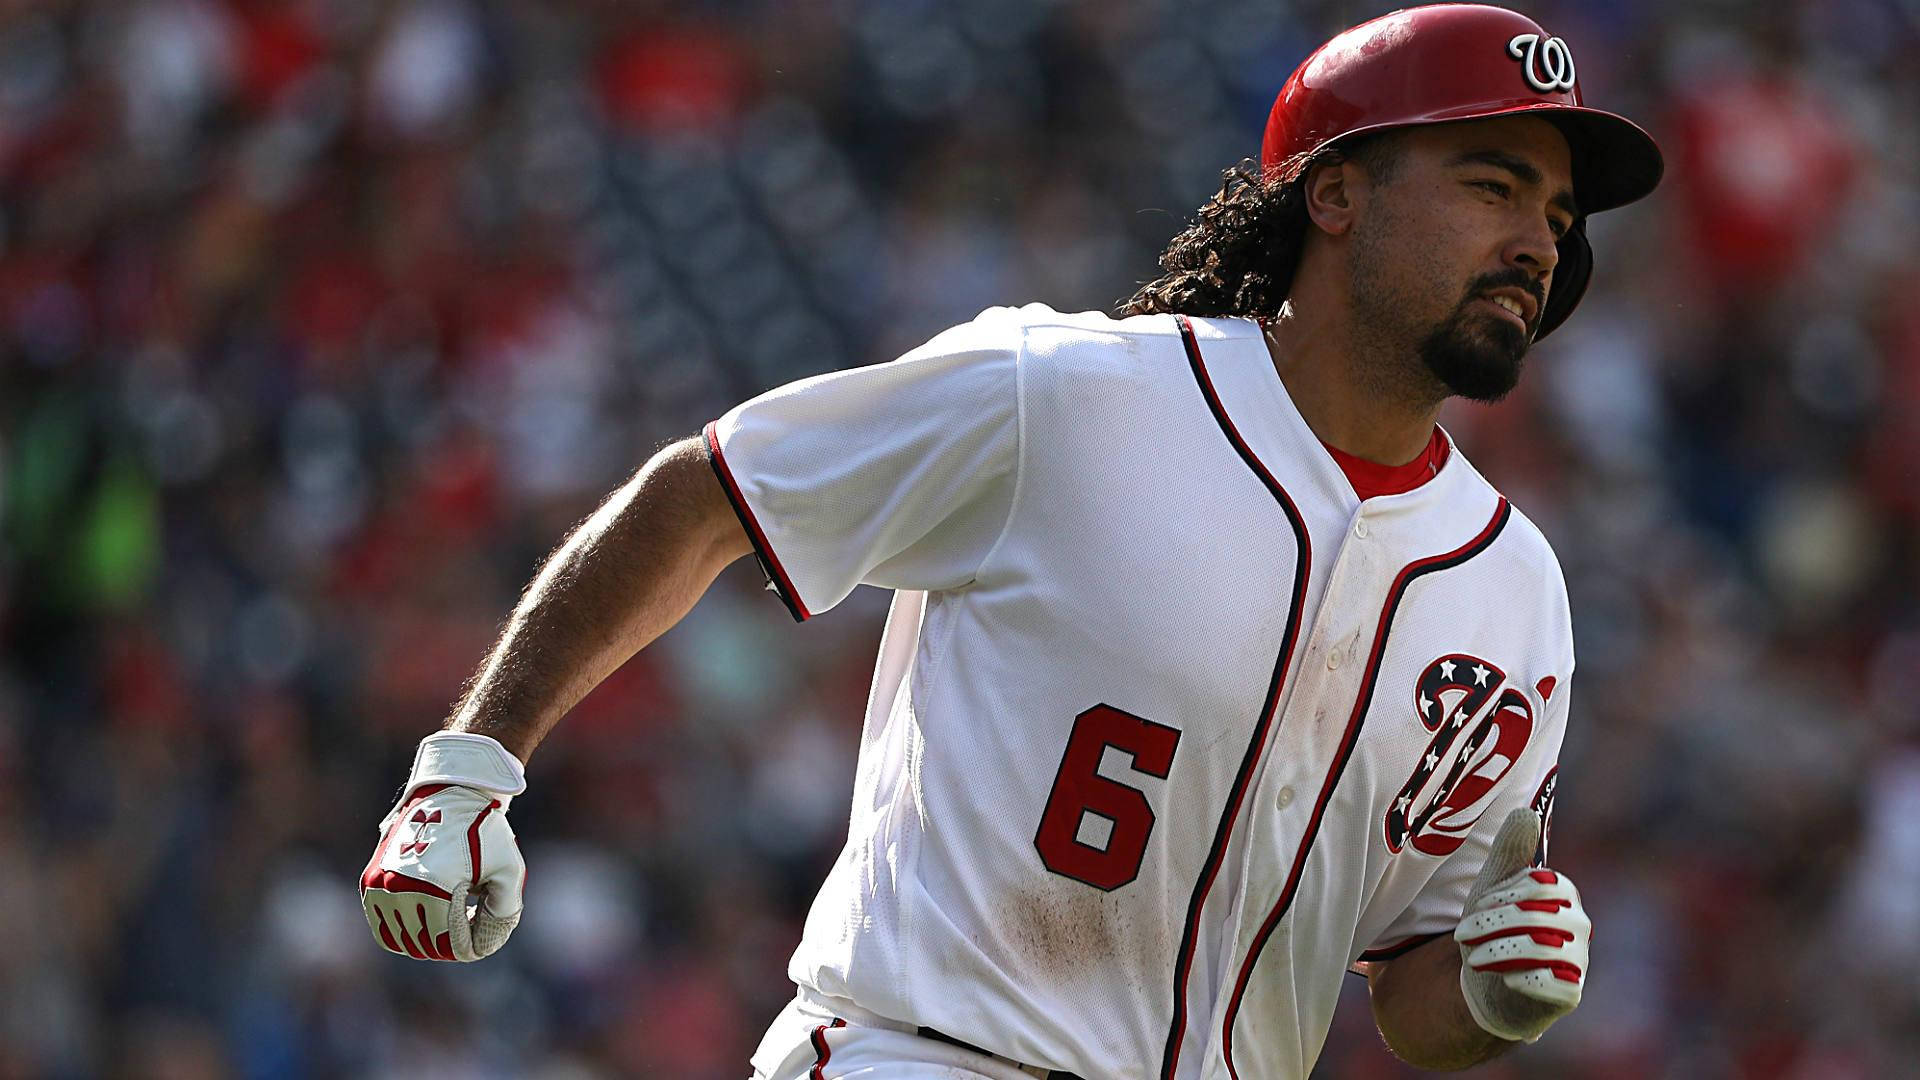 Anthony Rendon Jogging During Game Background